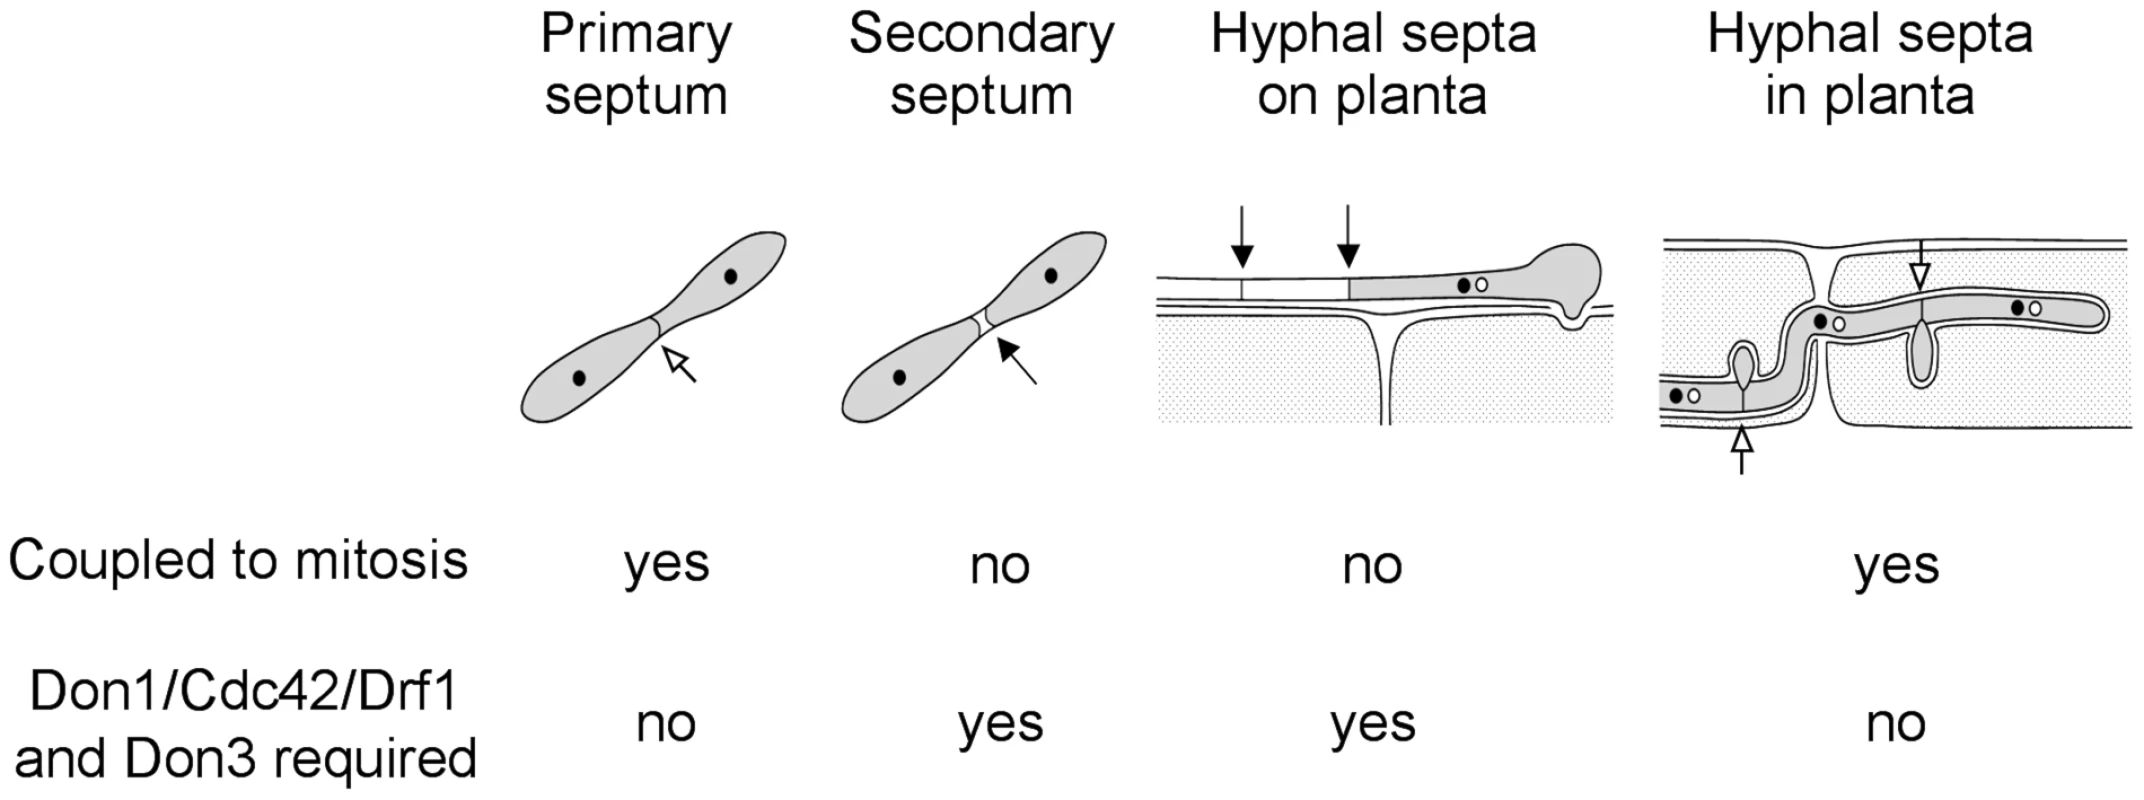 The Cdc42 signaling network regulates septation events that are uncoupled to mitosis.